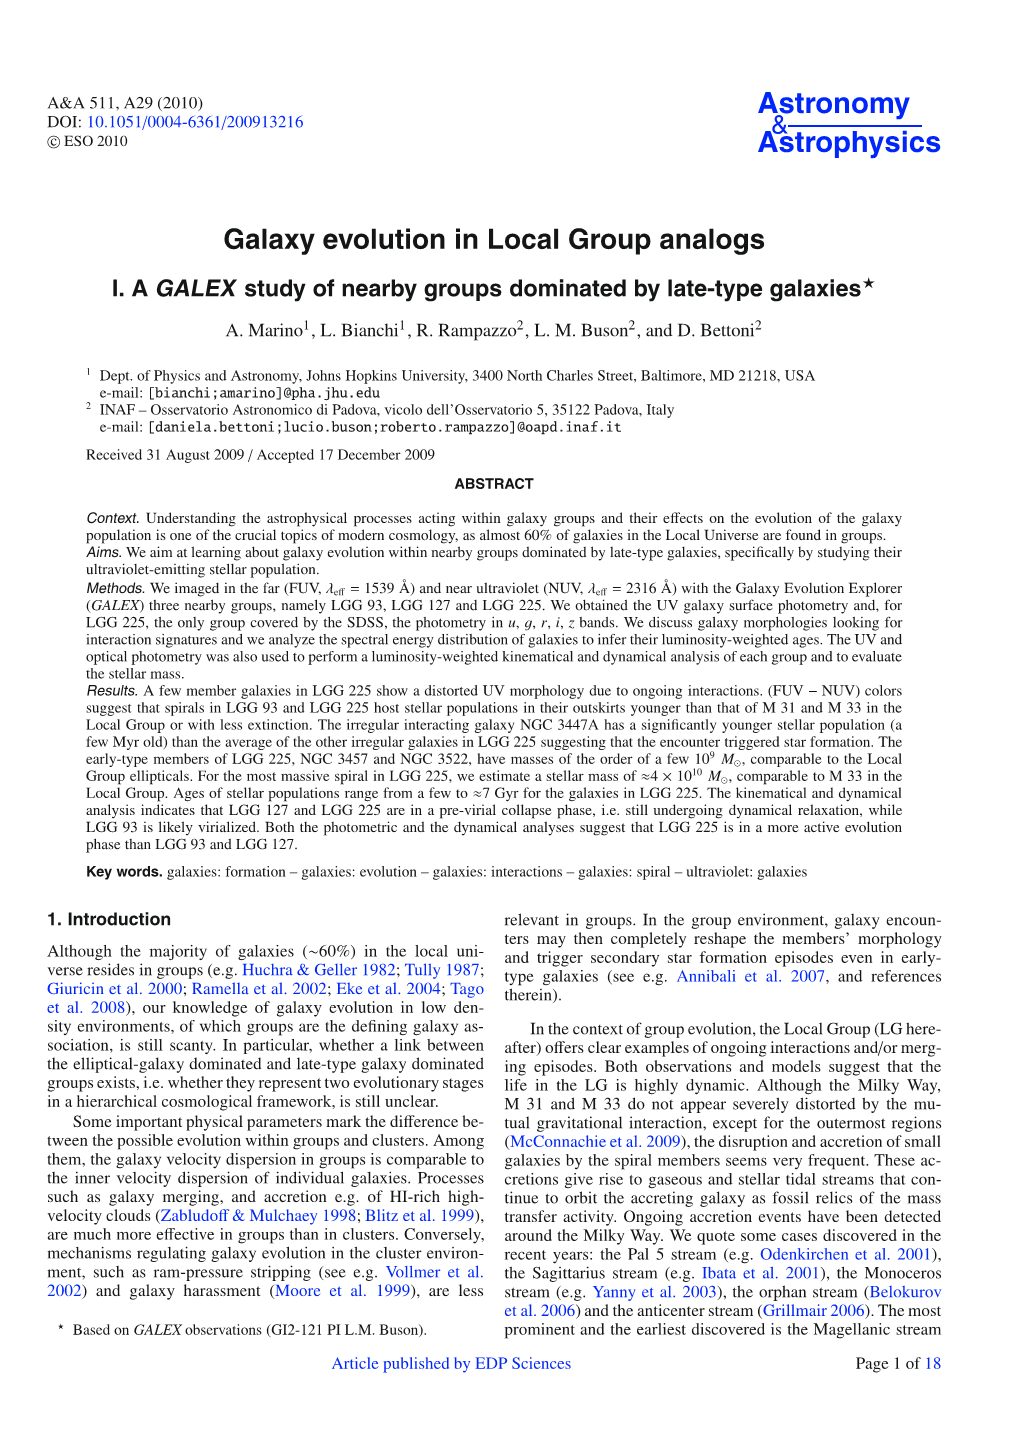 Galaxy Evolution in Local Group Analogs*